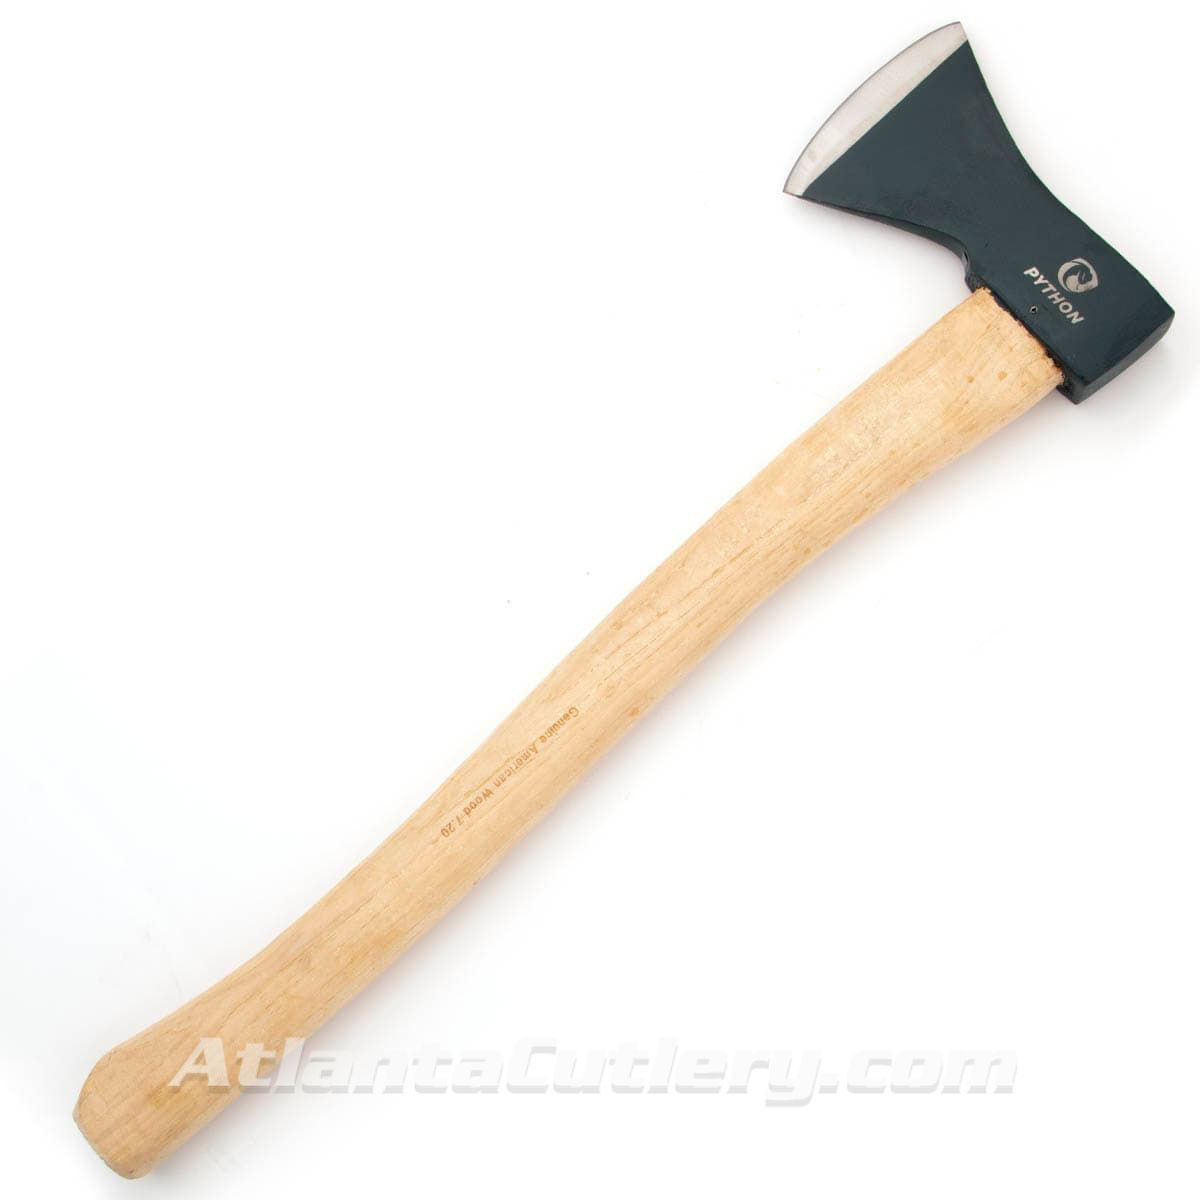 Python Hudson Bay Axe with Drop forged 1055 high carbon steel blade and thick American Hickory handle